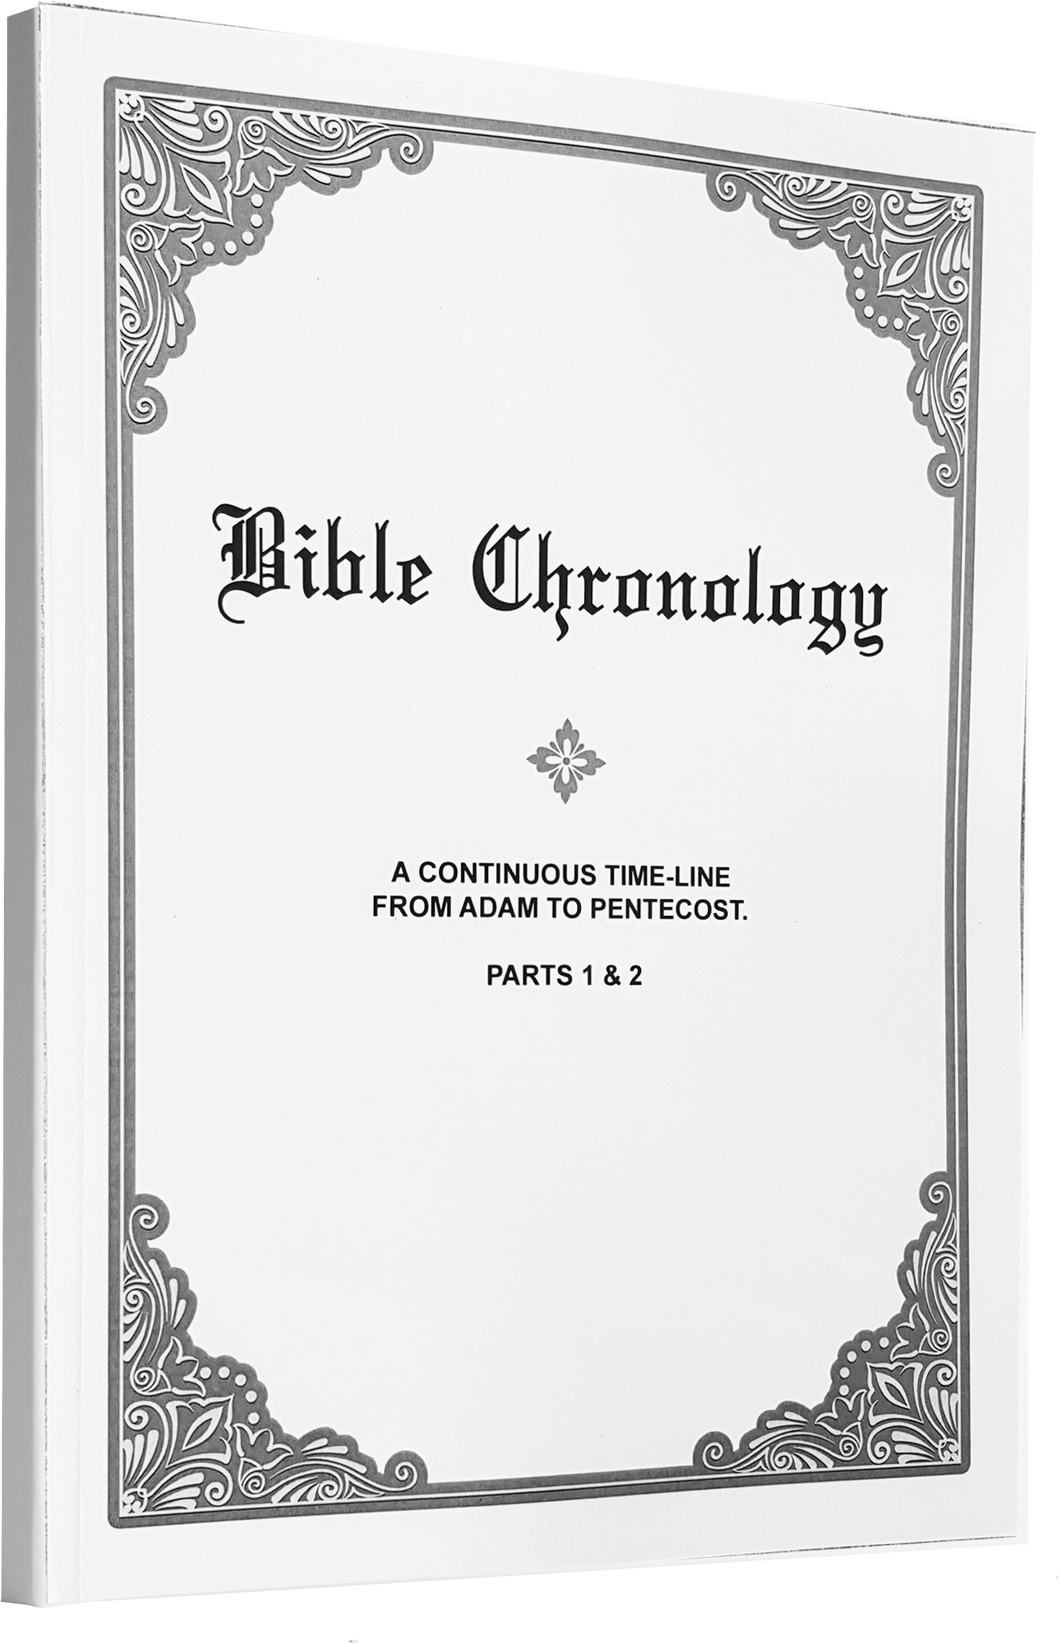 The Bible Chronology